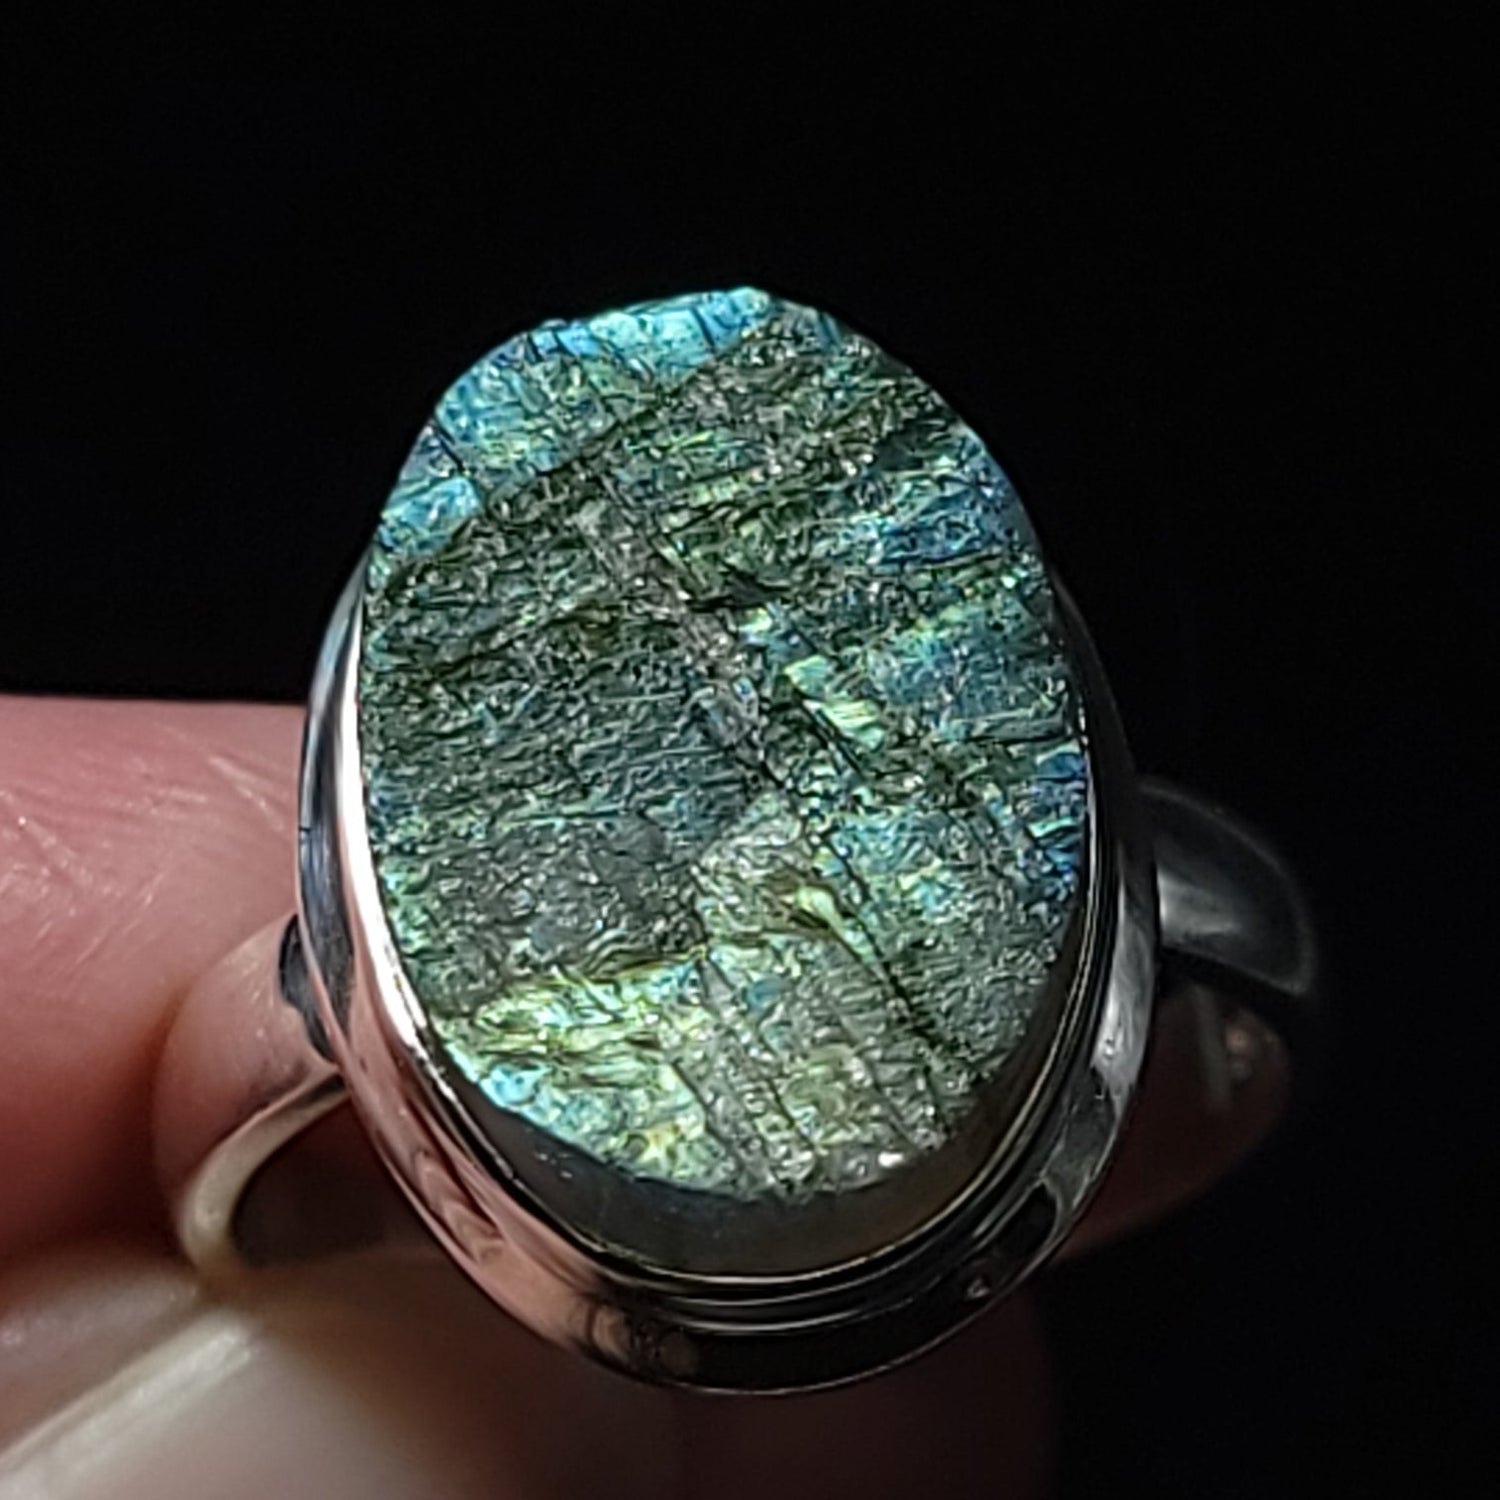 Labradorite Ring Sterling Silver Oval Rough Green/Blue Stone - Elevated Metaphysical